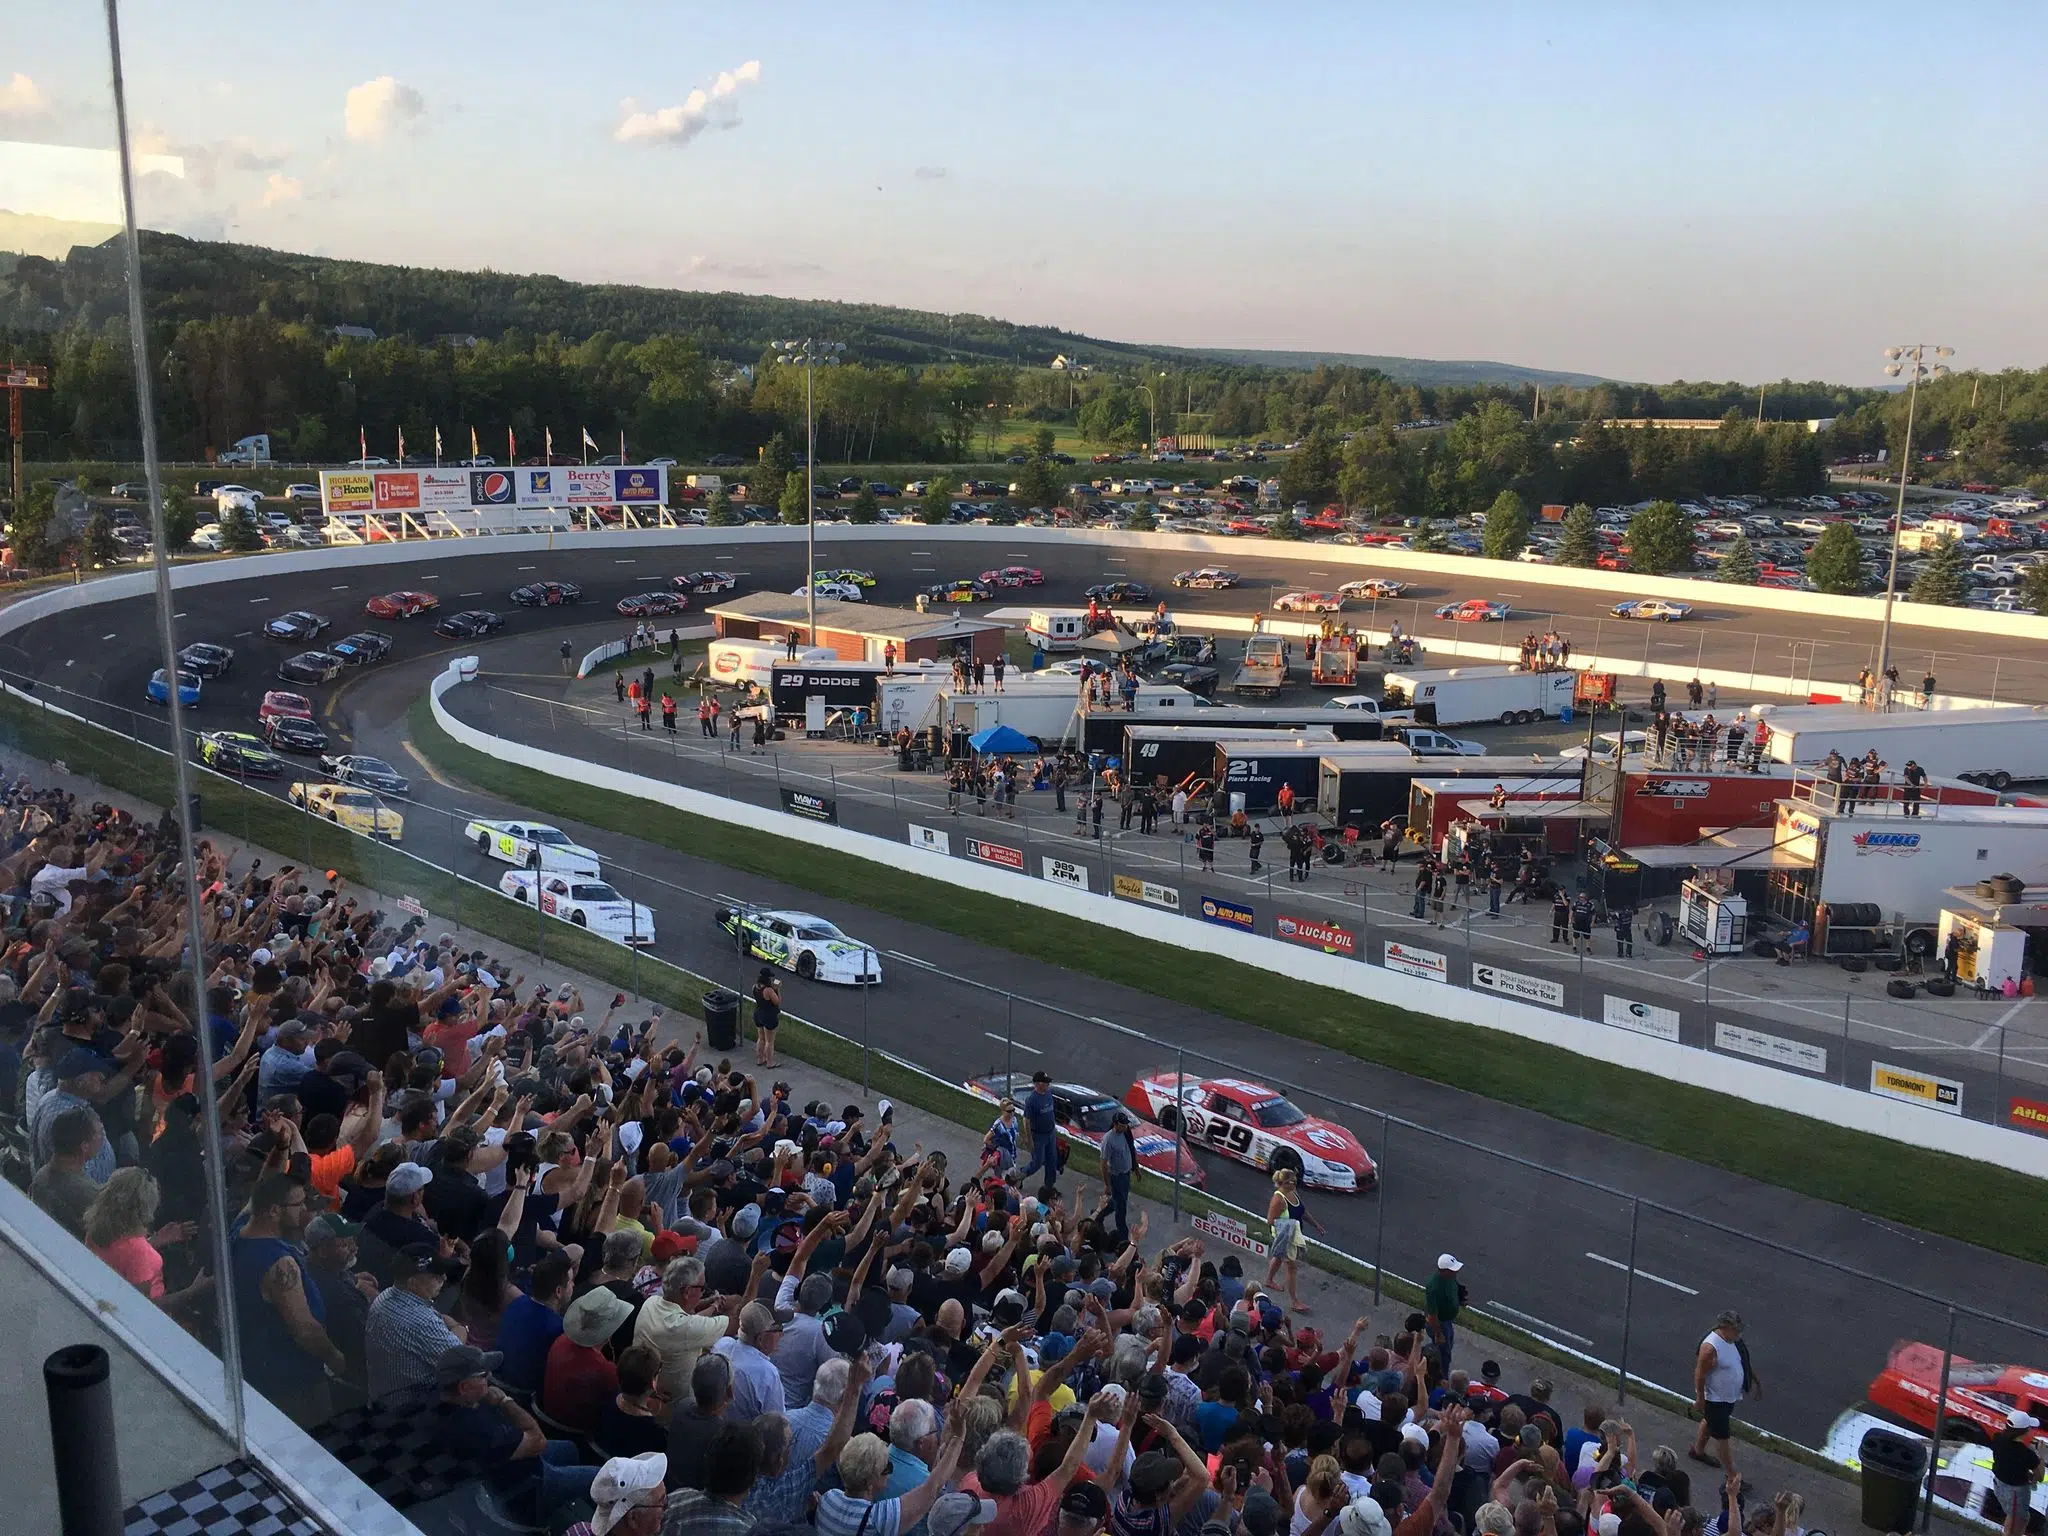 Antigonish racetrack opening after for first season since pre-pandemic times